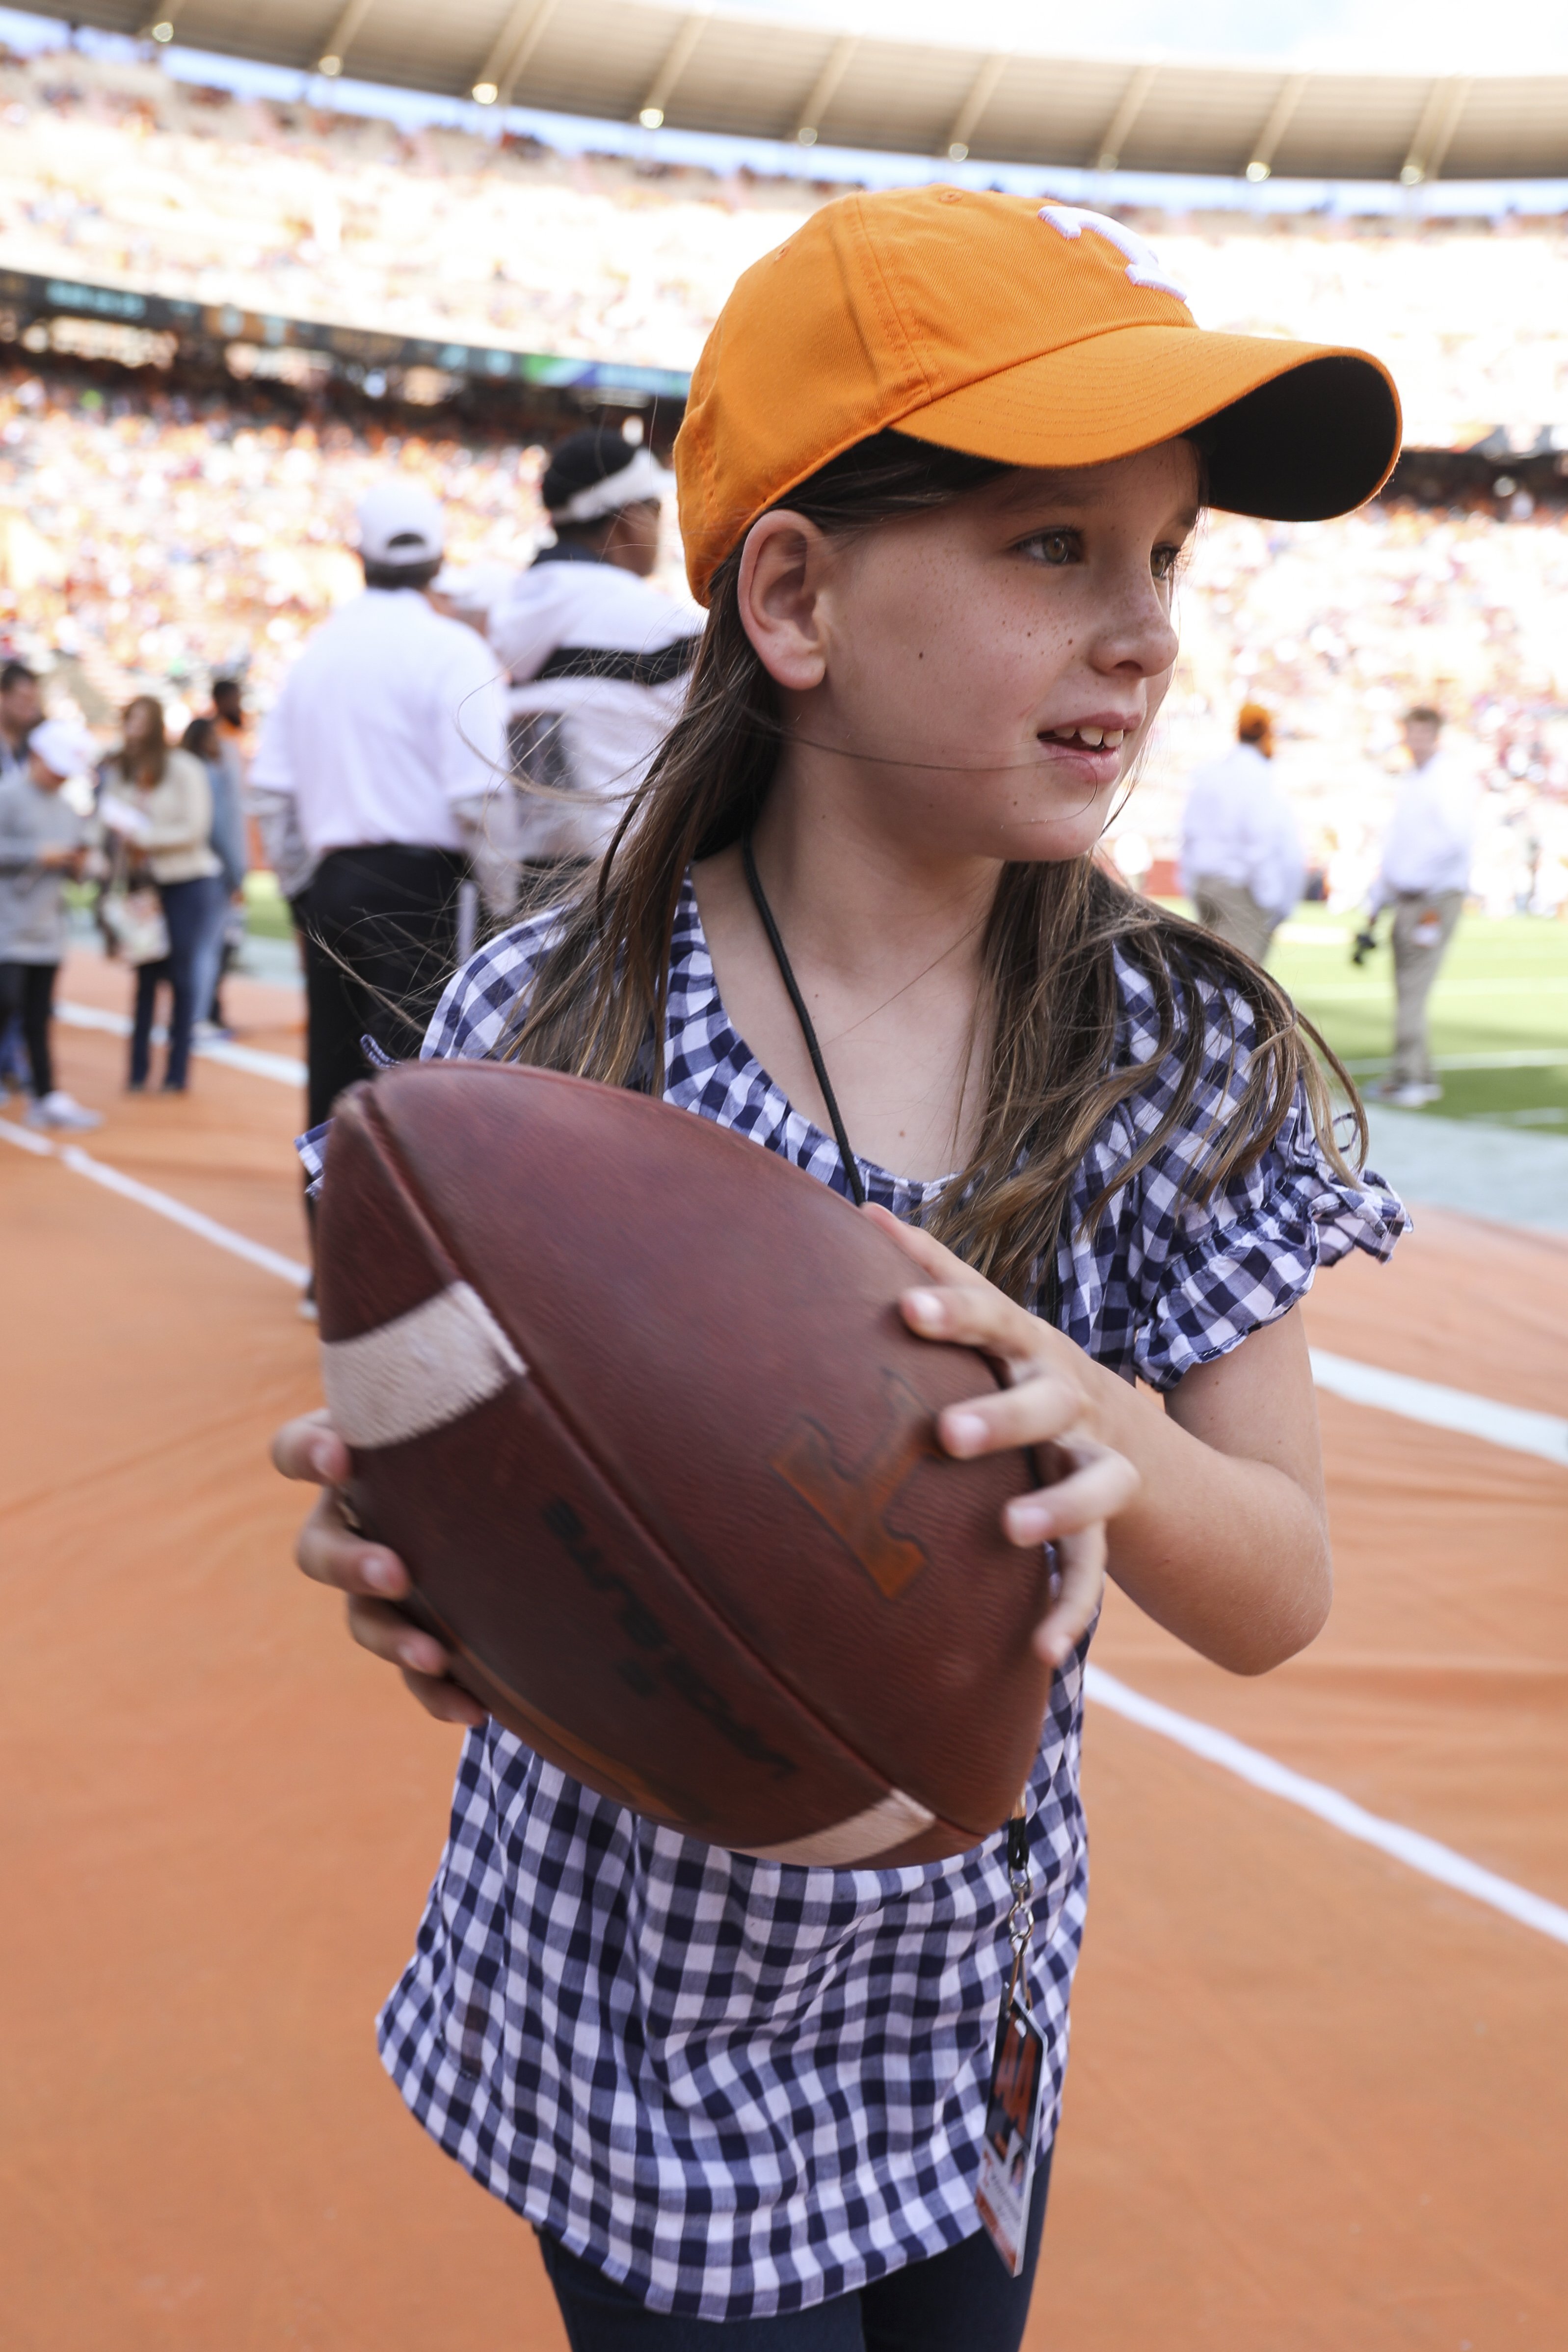 Mosley Manning, daughter of Peyton Manning at Neyland Stadium on October 20, 2018, in Knoxville, Tennessee. | Source: Getty Images